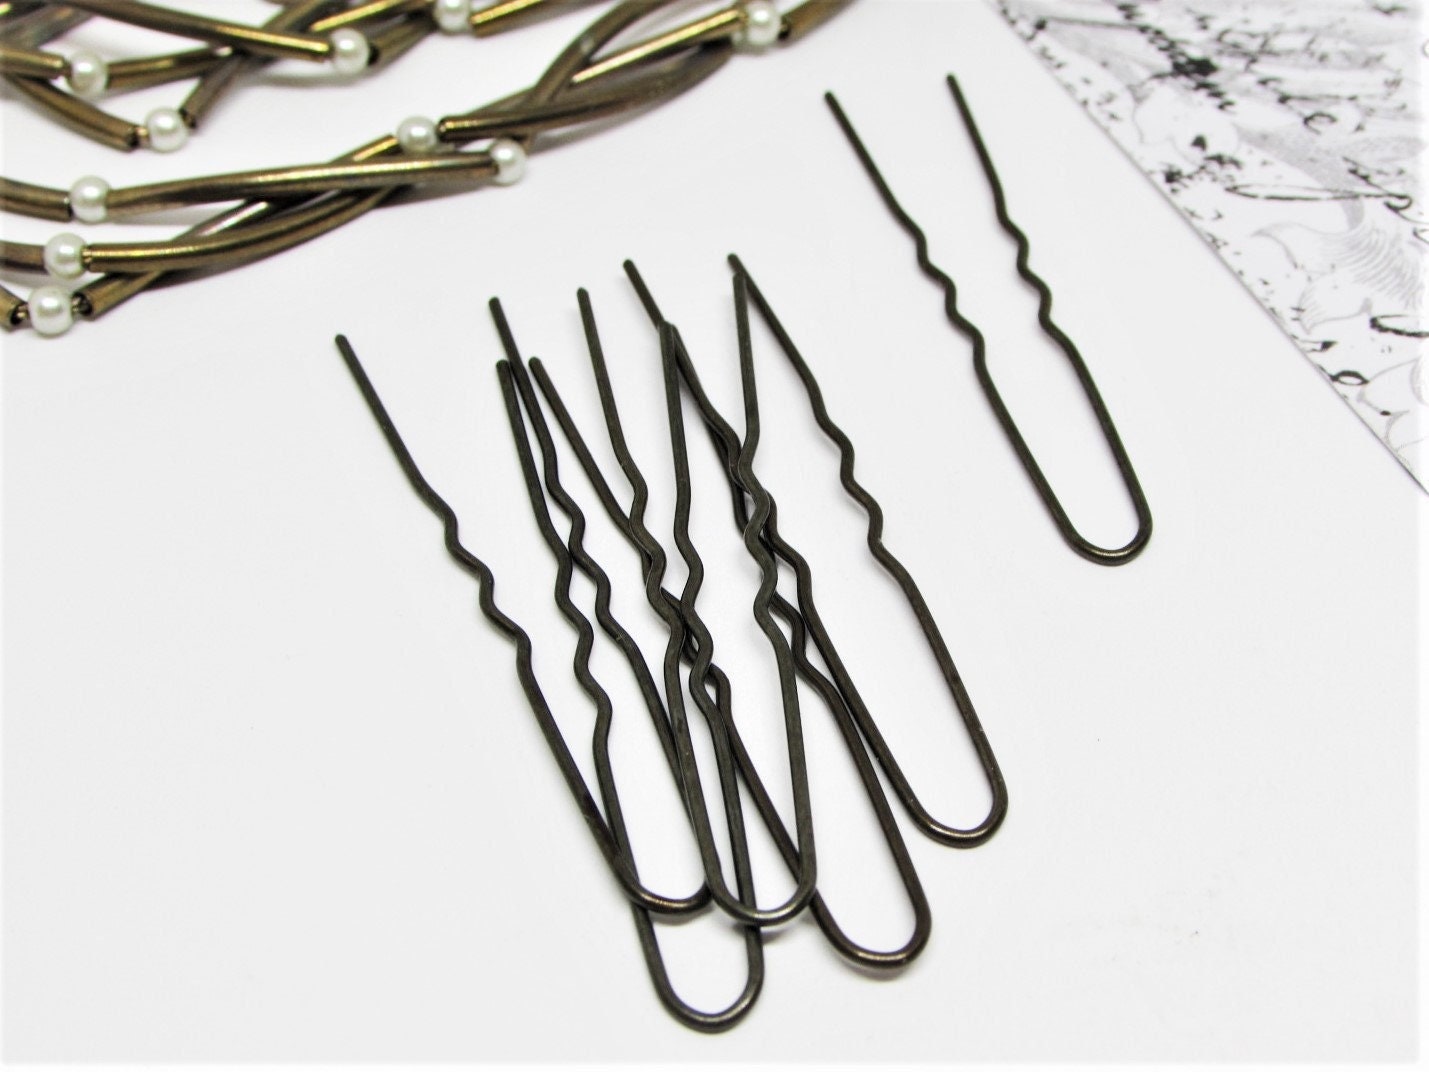  2.75 Large Bobby Pins Brown 240PCS Extra Long Bobby Pins for  Thick Hair Waved Hair Pin for Styling with Box : Beauty & Personal Care